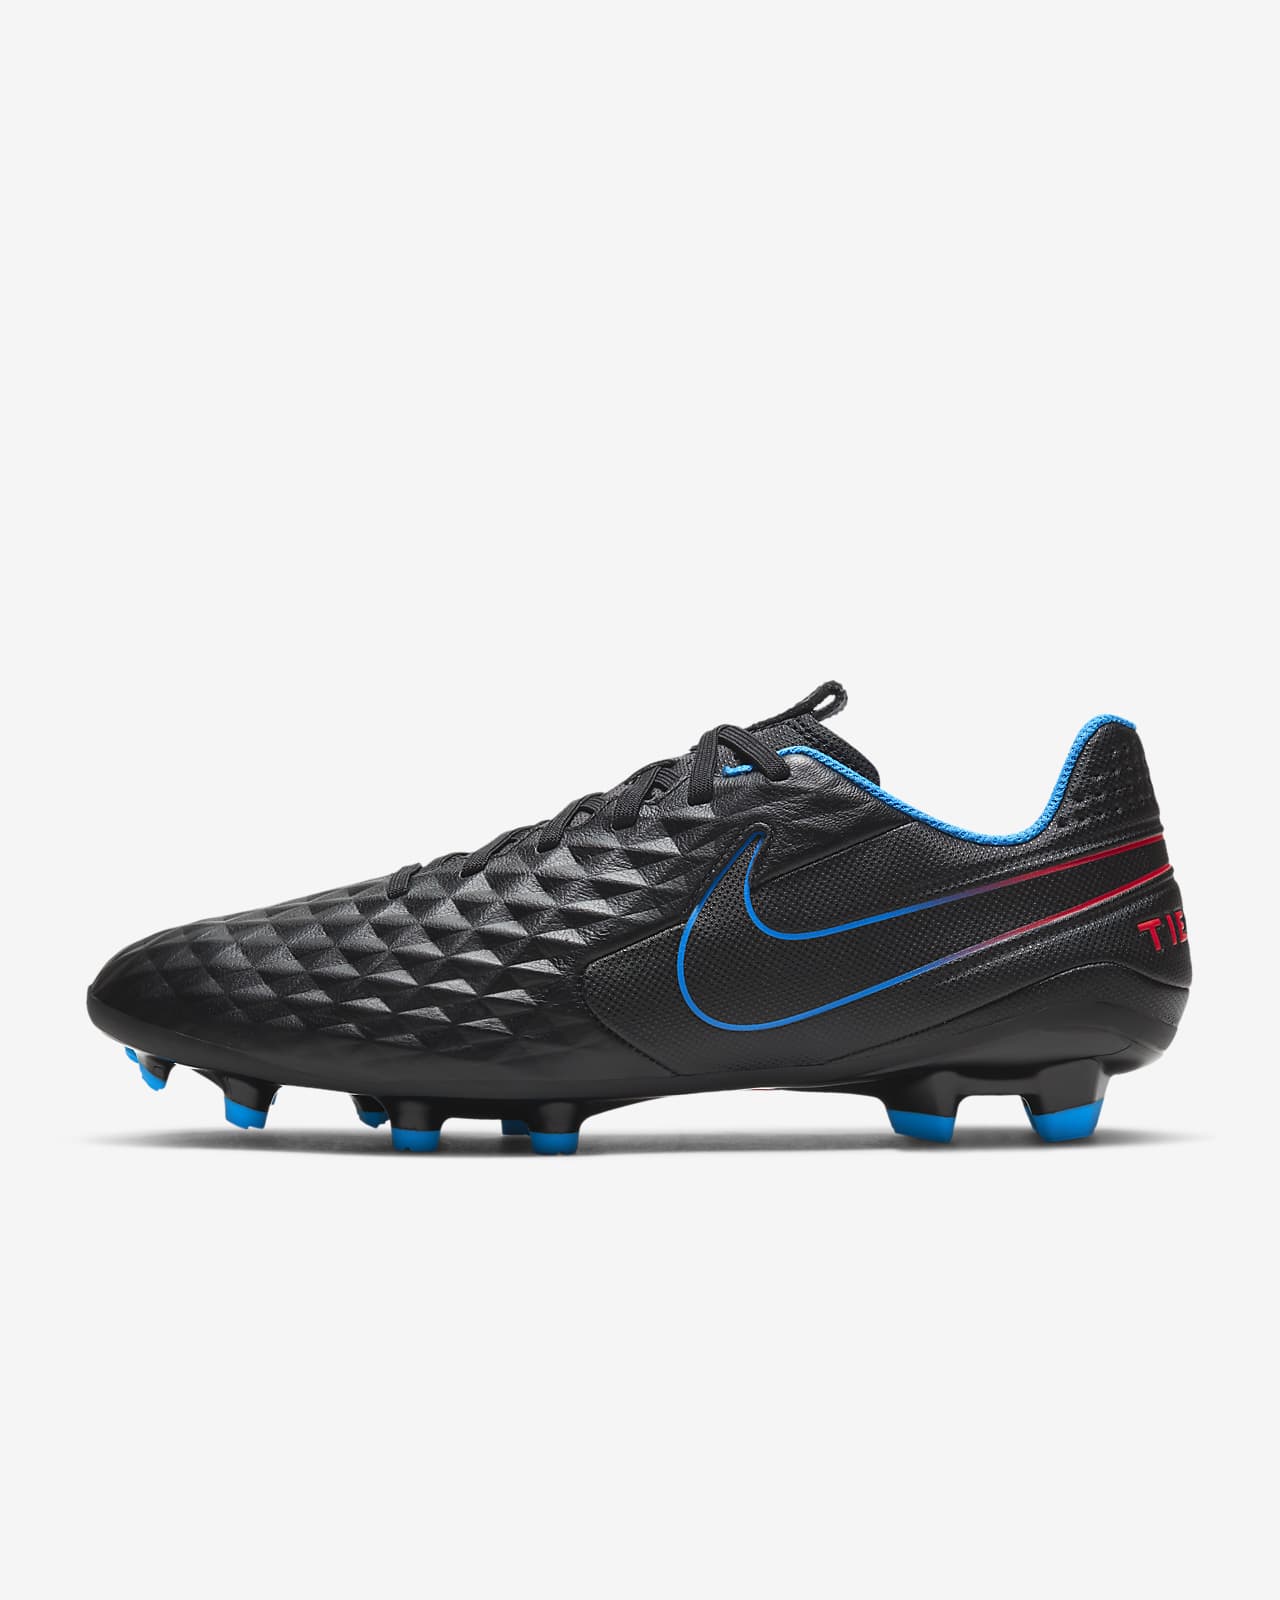 nike football boots red and black